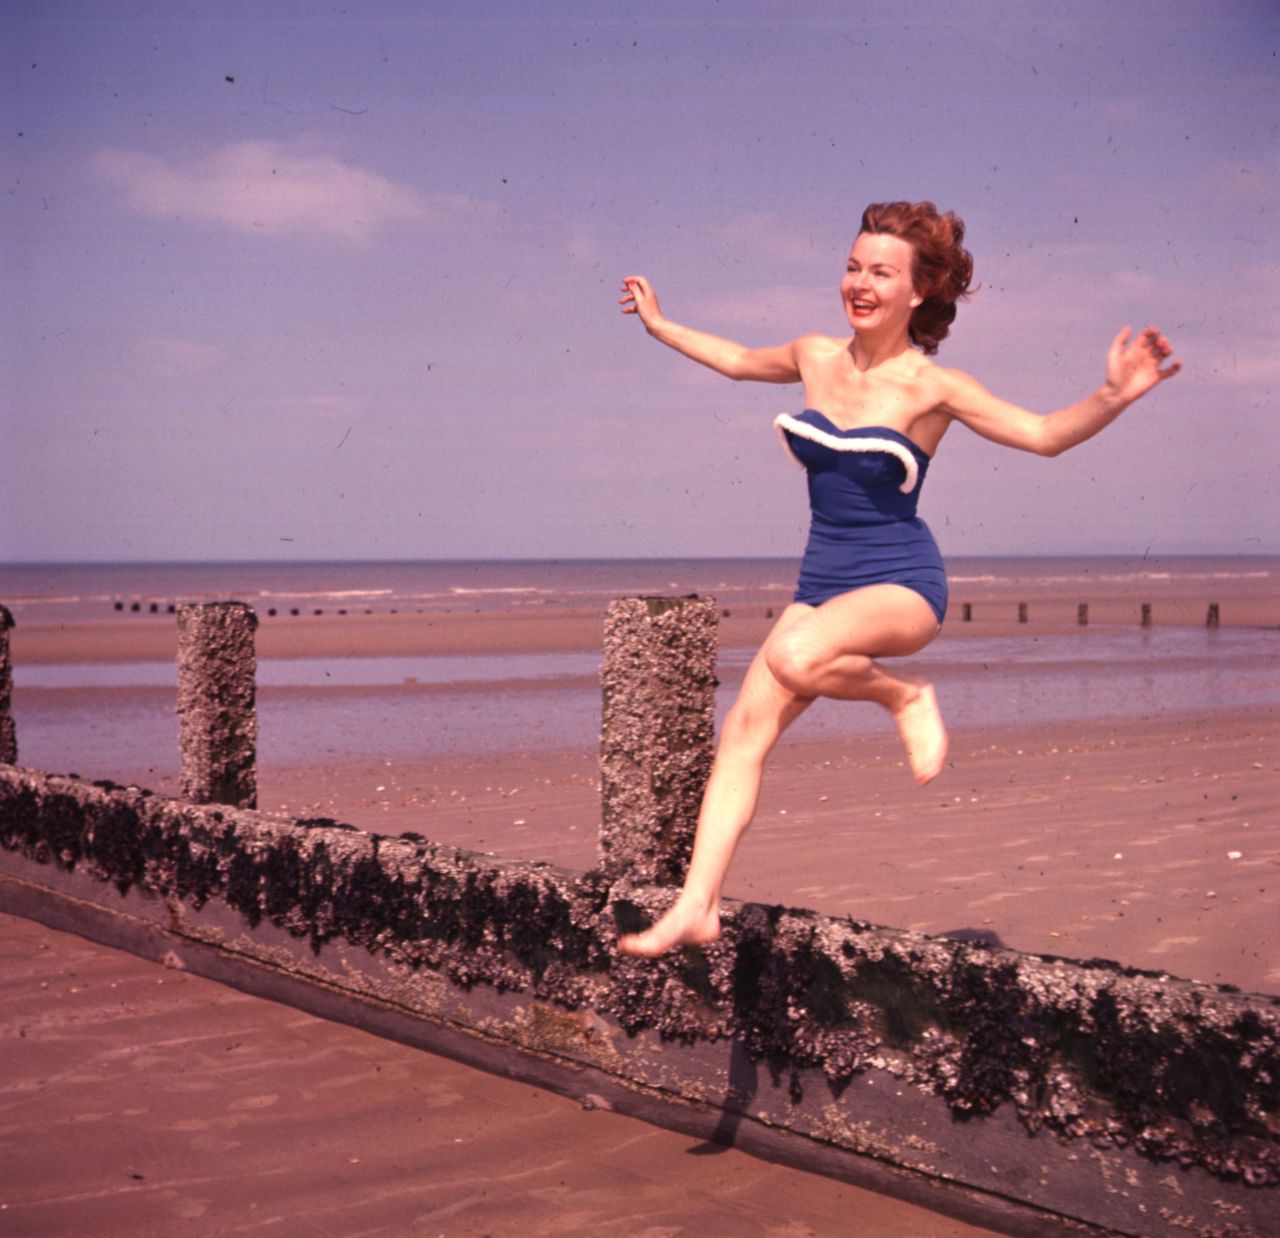 From sailor suits to pirate accessories, our love affair with nautical fashion has weathered many a storm. We take a look back at some of history's most enduring designs -- and their origins in mariner work wear. <br />Here, actress Marianne Brauns leaps over a breakwater on the beach, wearing a structured blue swimsuit with white trim, in 1950.